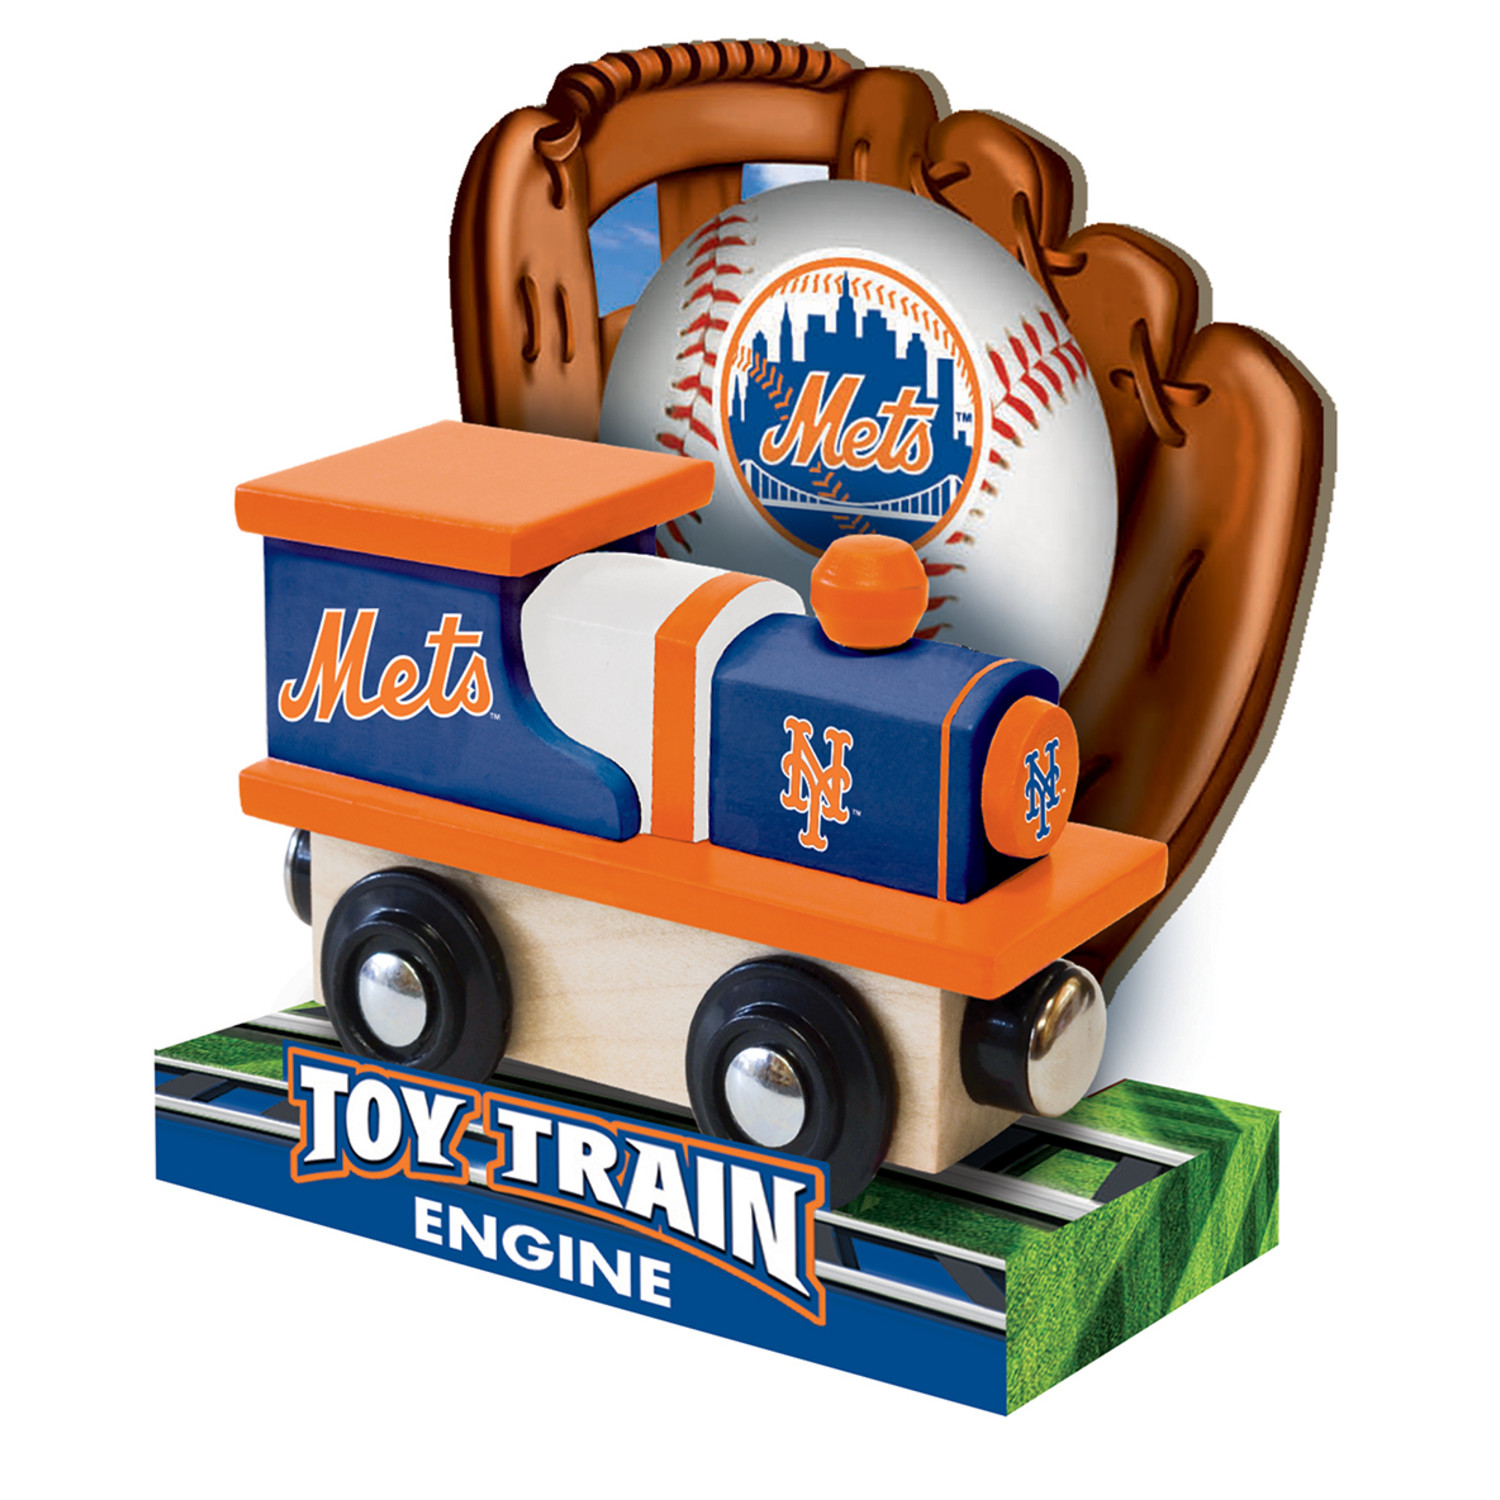 MasterPieces Officially Licensed MLB New York Mets Wooden Toy Train Engine For Kids - image 4 of 5